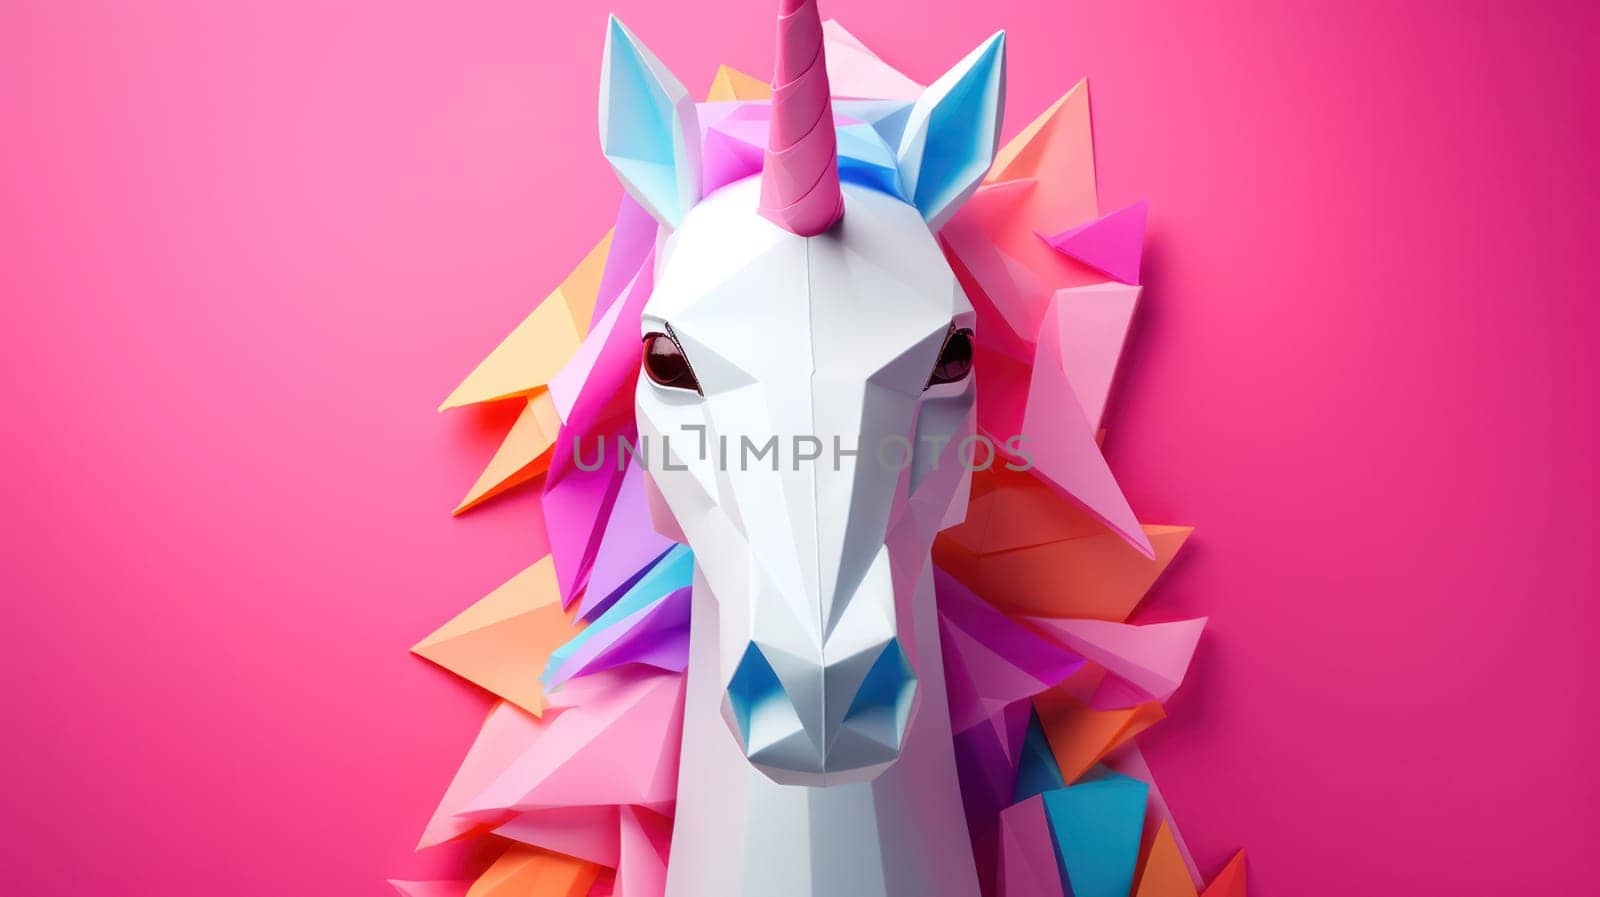 Whimsical Unicorn: A Playful, Colorful, and Magical Creature with a Geometric Pink and White Origami Paper Design on a Bright Blue Background